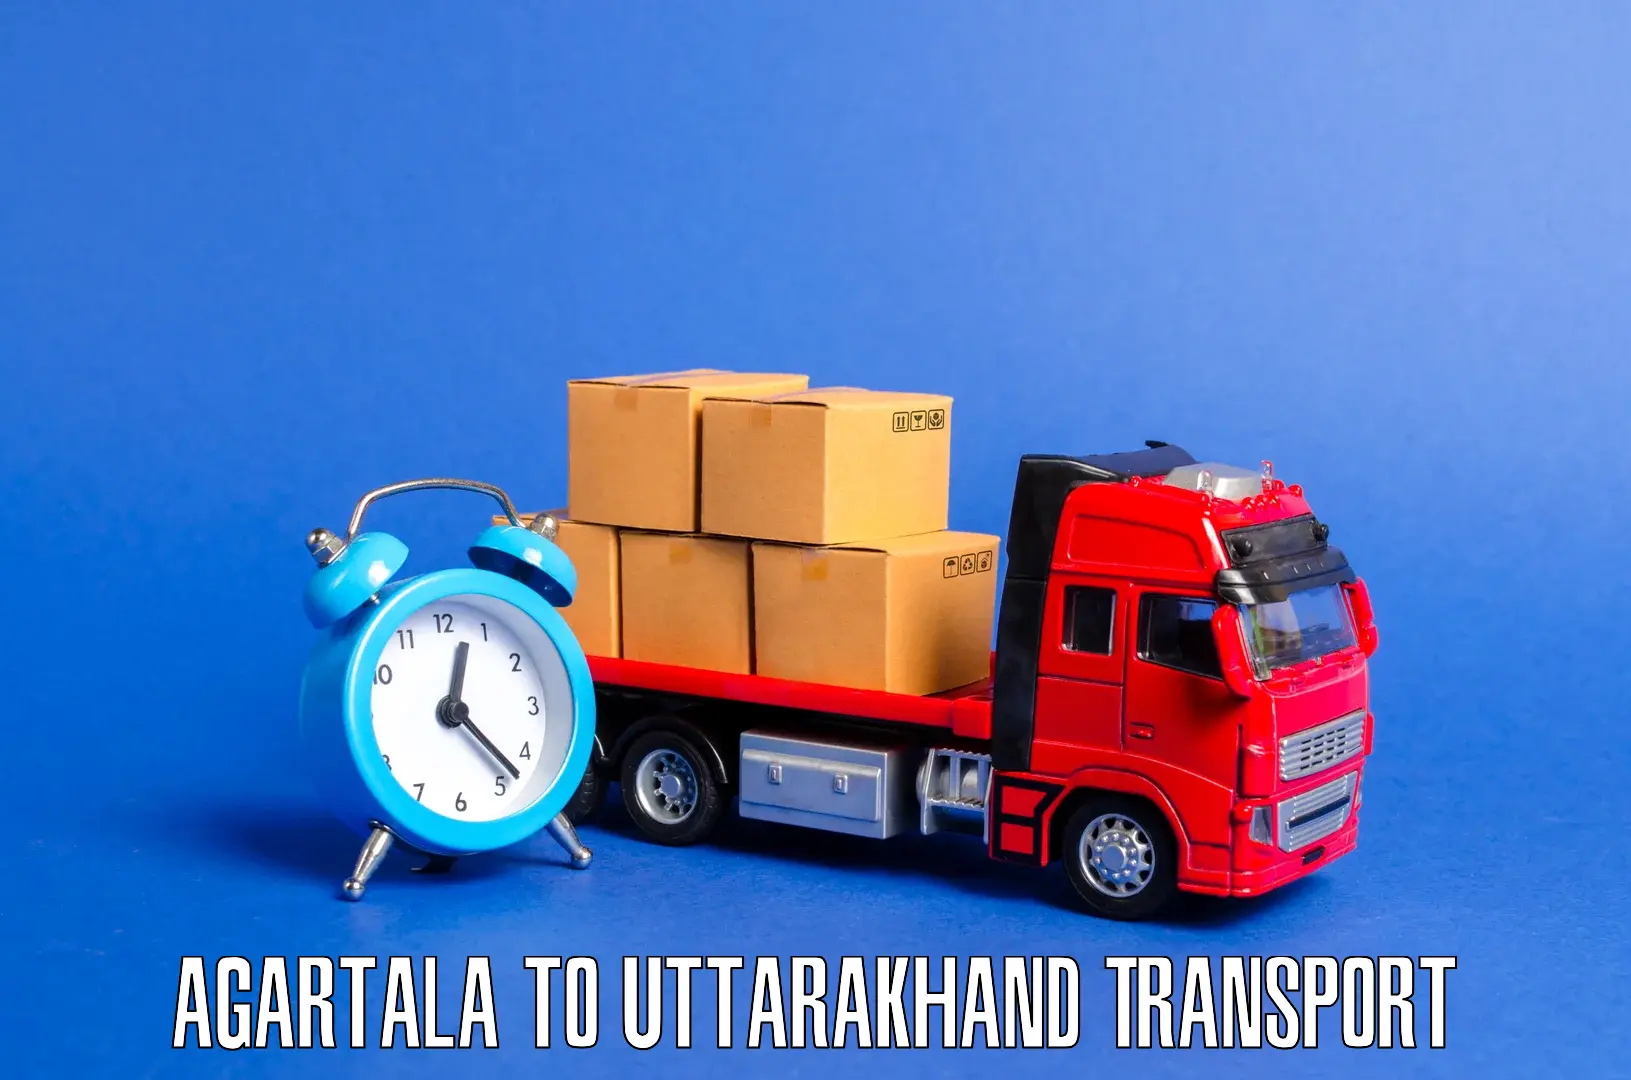 Land transport services in Agartala to Dwarahat